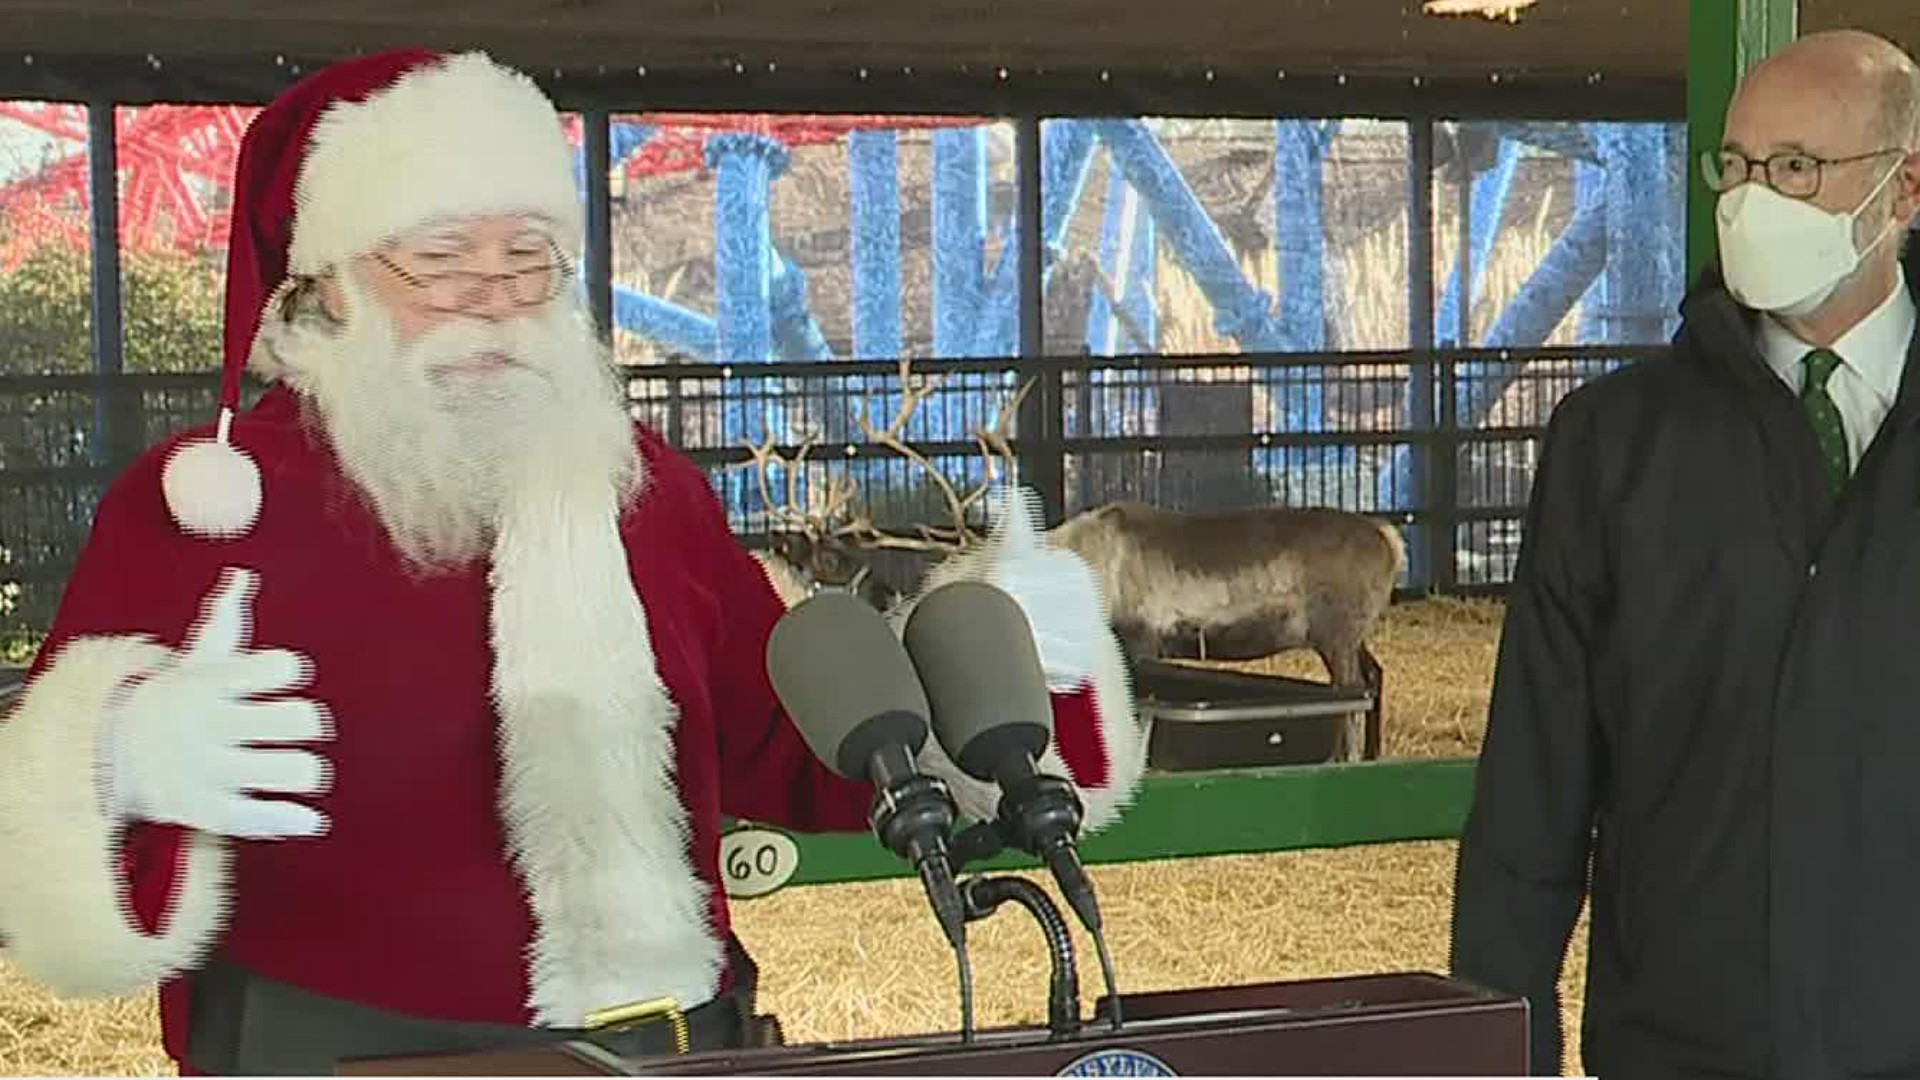 Wednesday’s event in Hershey ensures Santa's reindeer are all healthy and allowed to travel across the commonwealth.